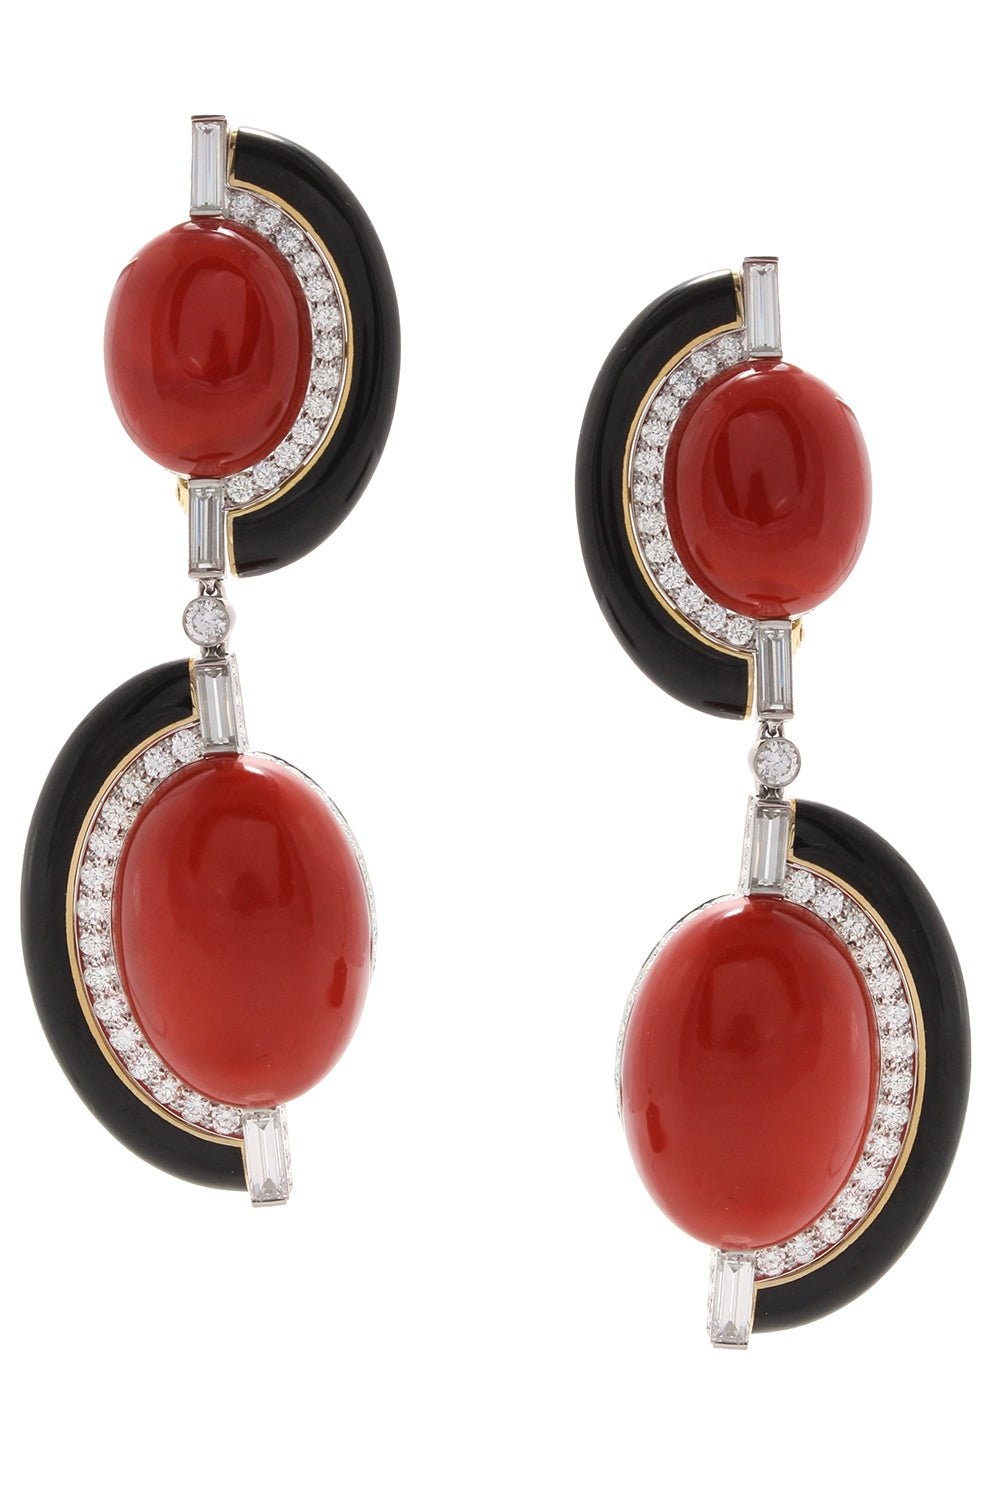 Counterpoint Couture Earrings - 1